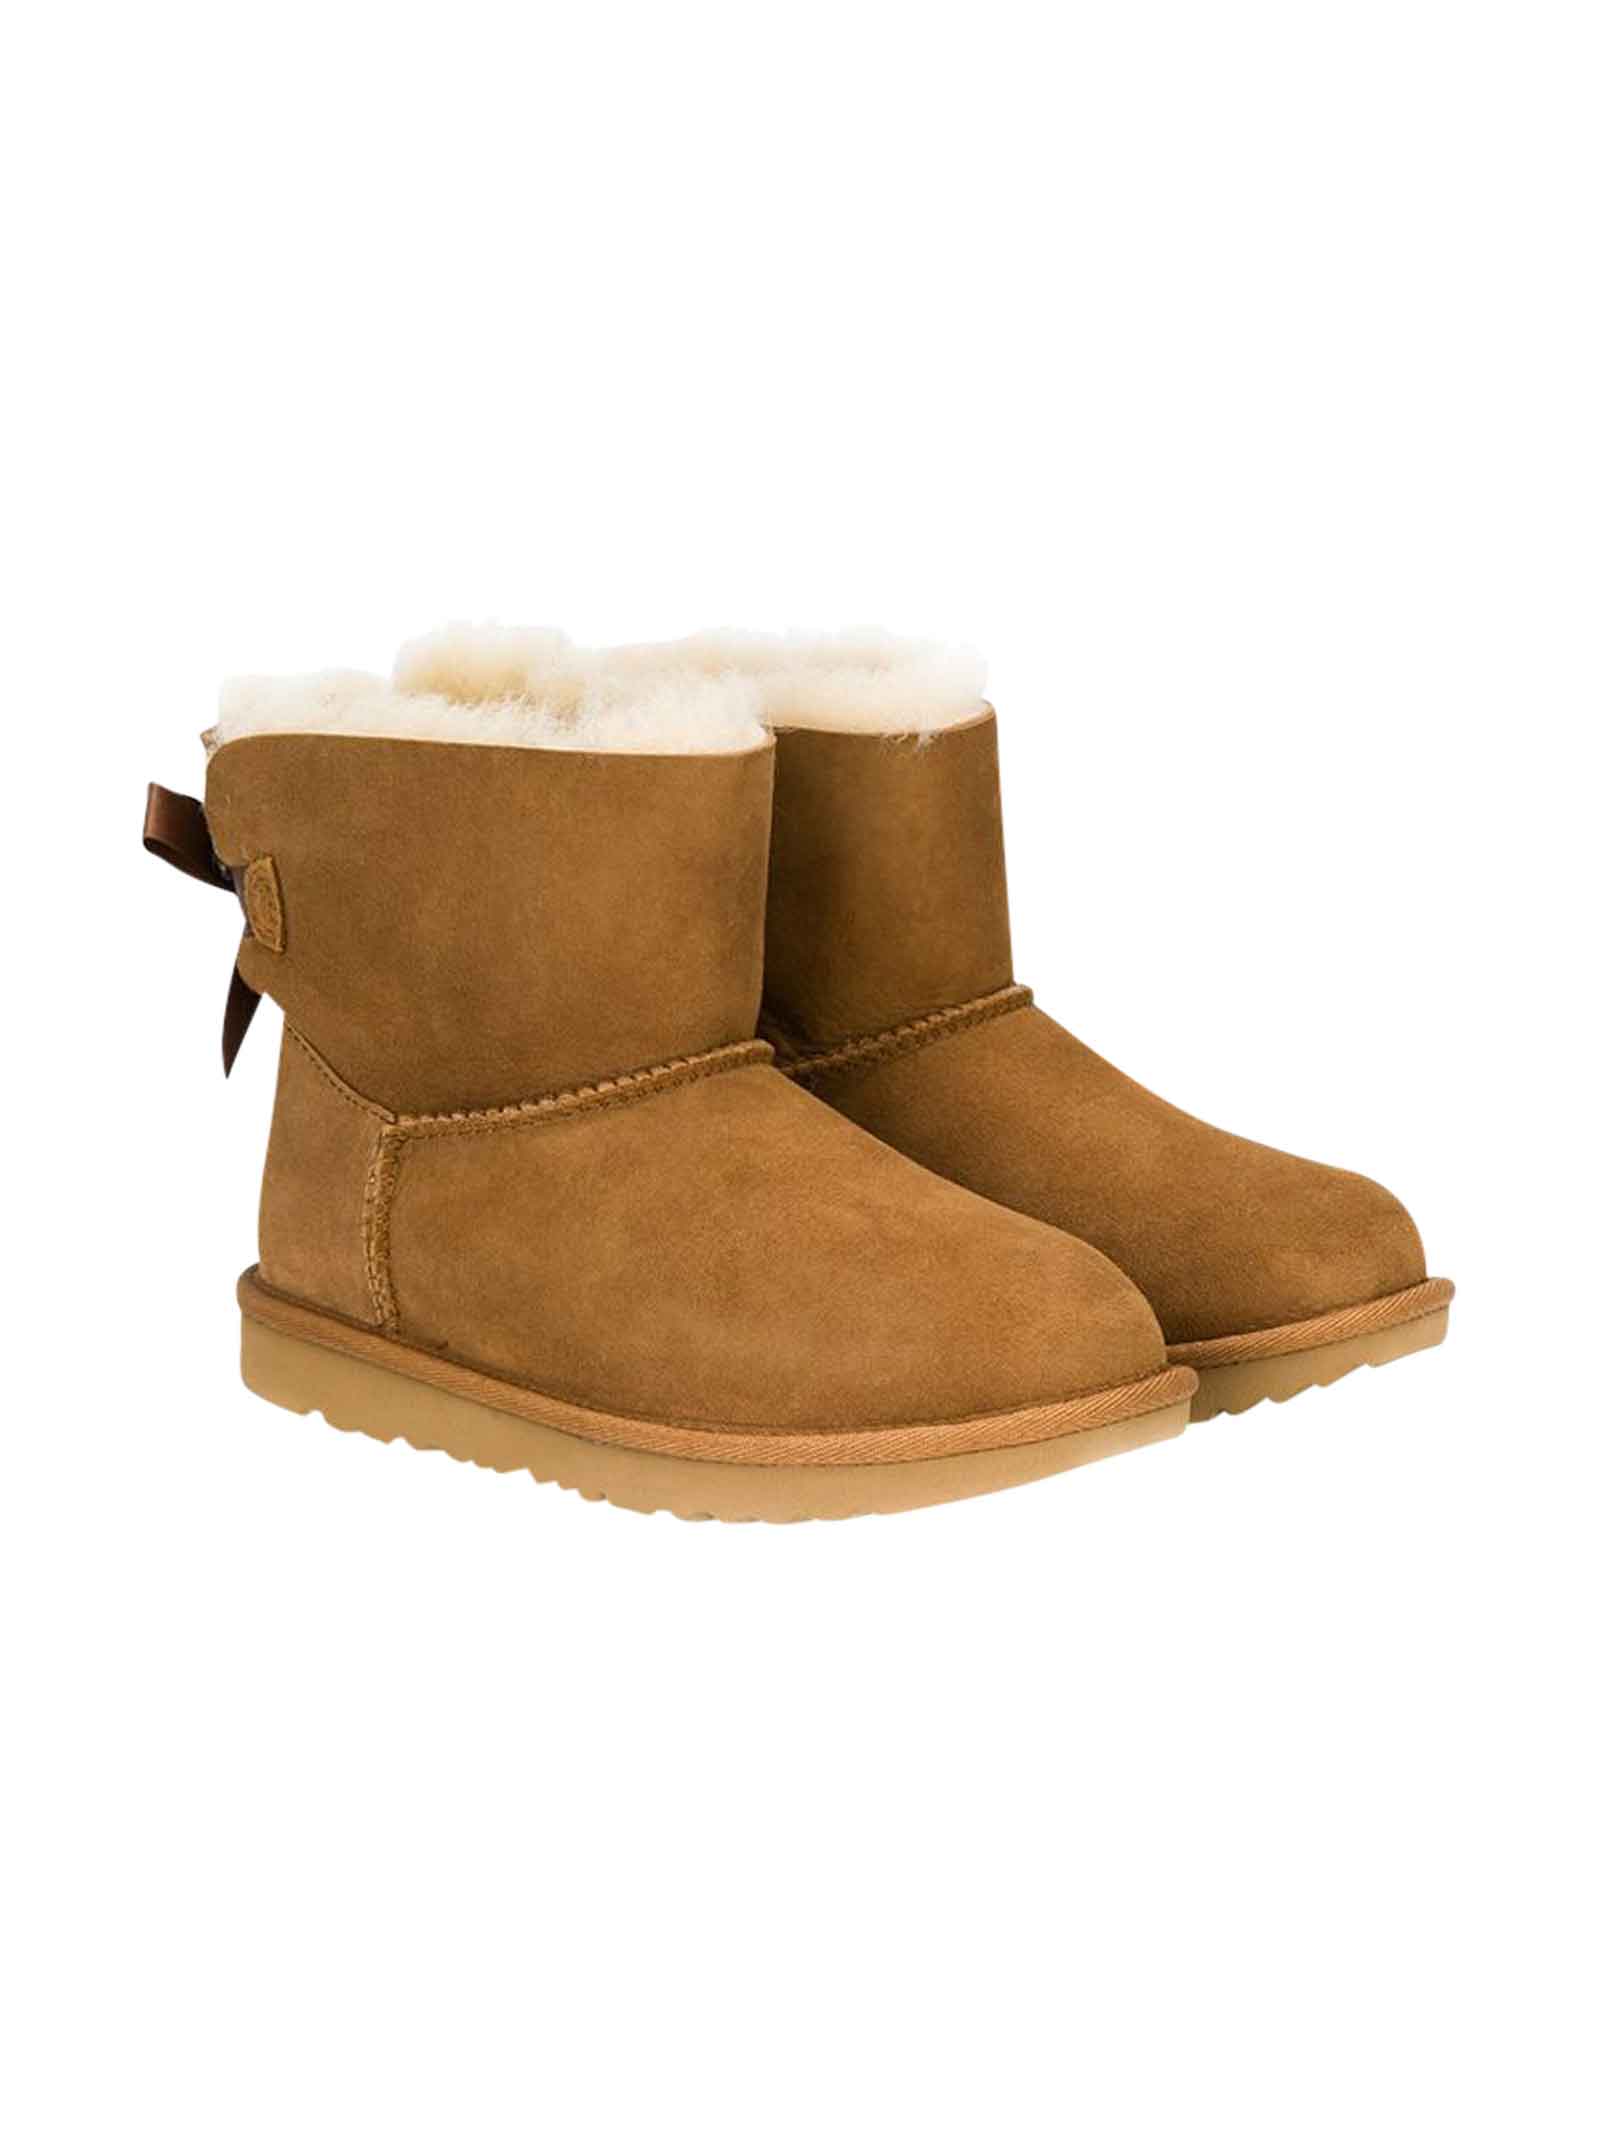 UGG Beige Teen Ankle Boots